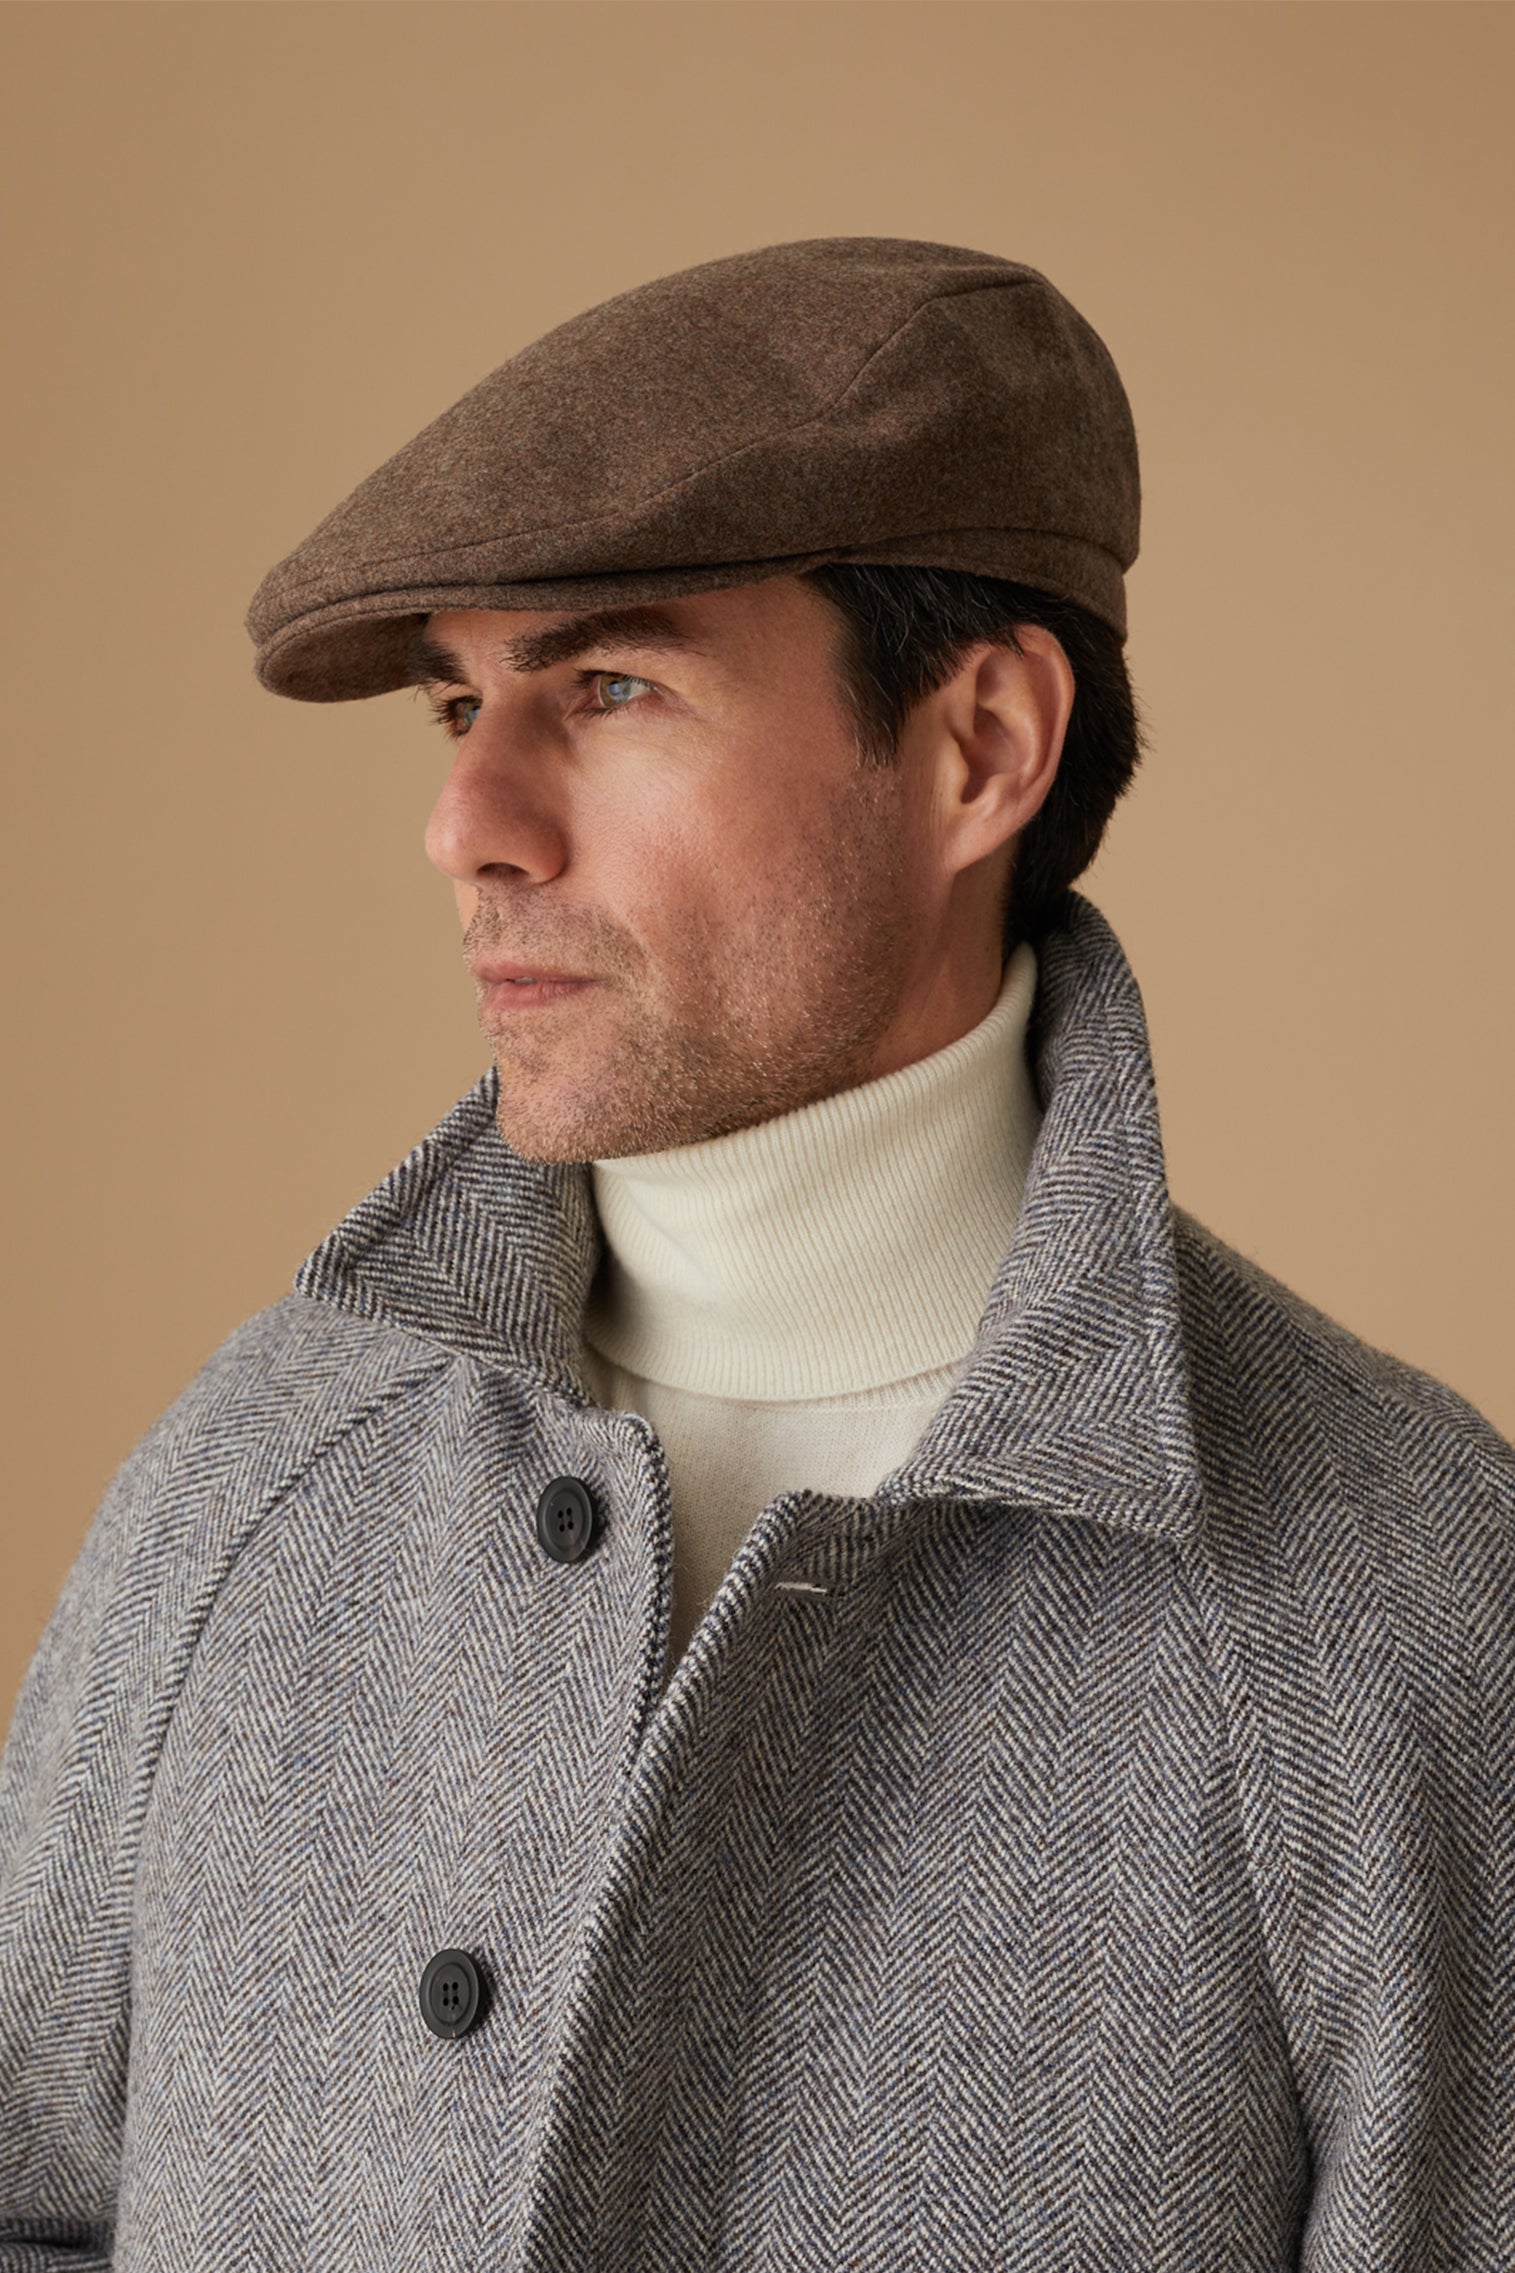 The Auric Anniversary Edition - Men's Hats - Lock & Co. Hatters London UK